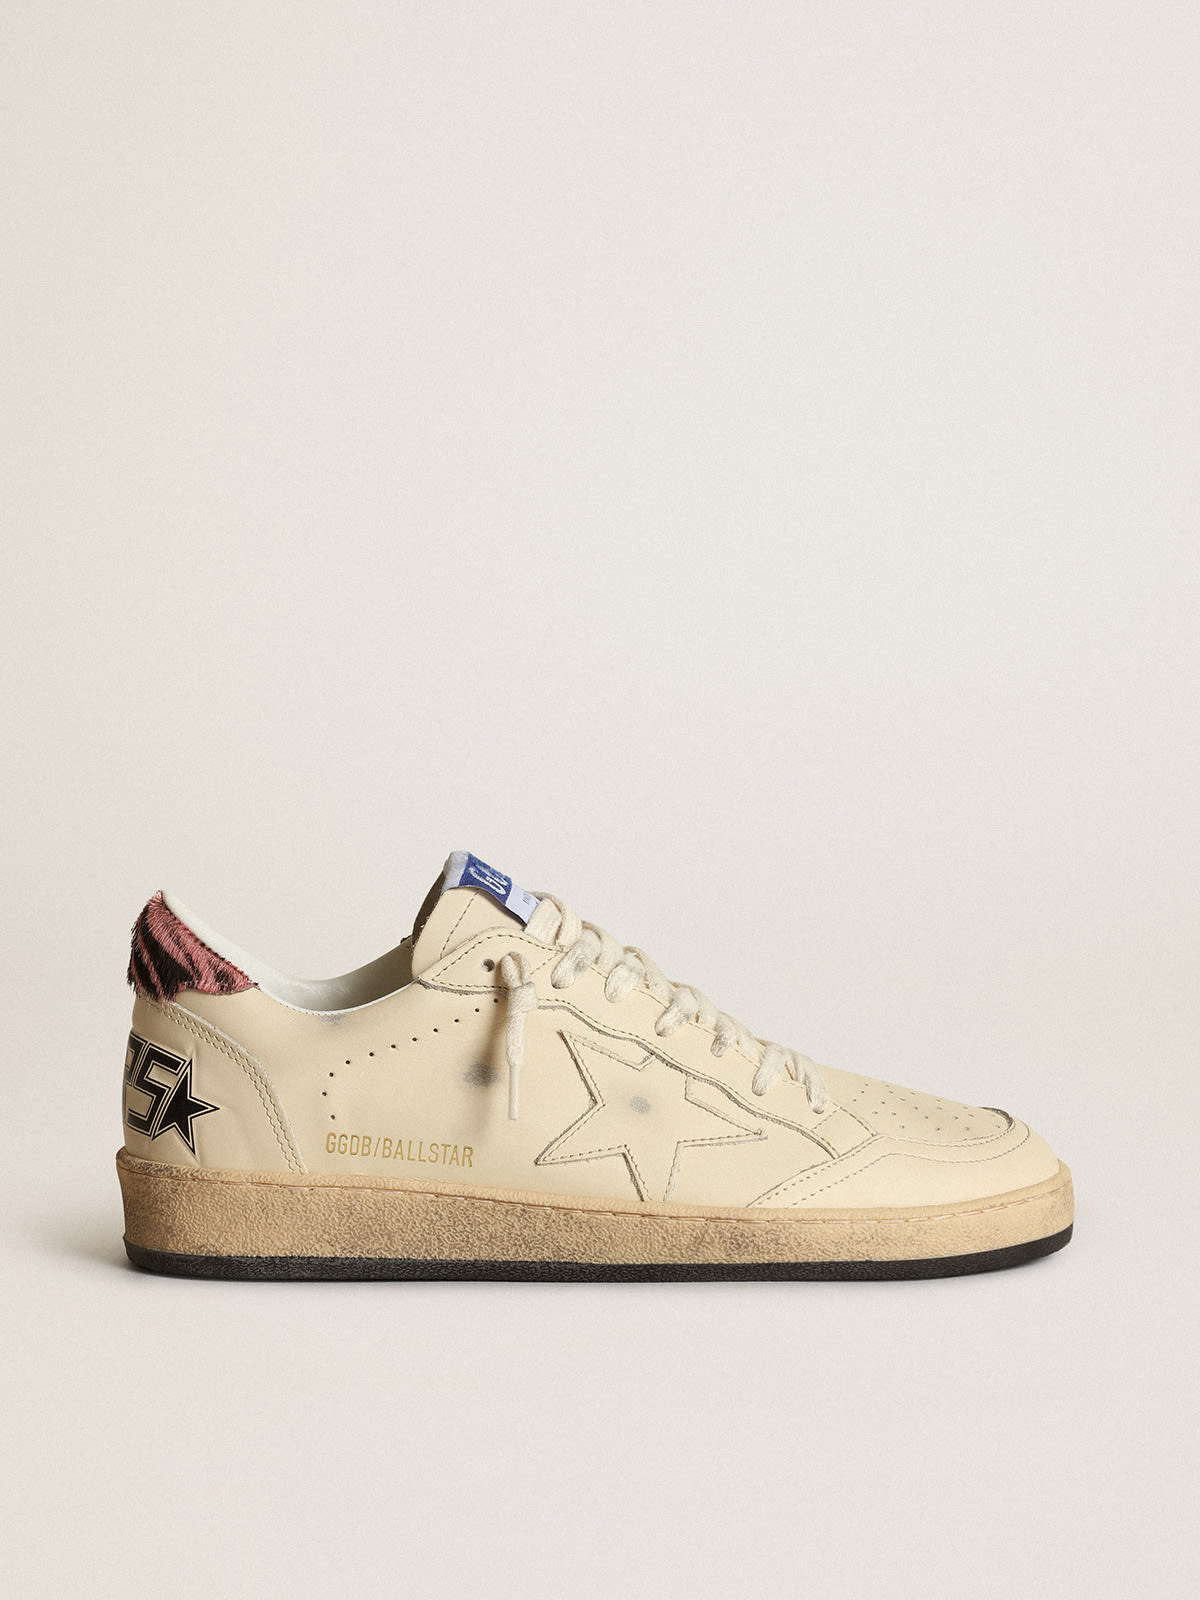 Golden Goose - Ball Star LTD sneakers in ivory leather with pink and black zebra-print pony skin heel tab in 